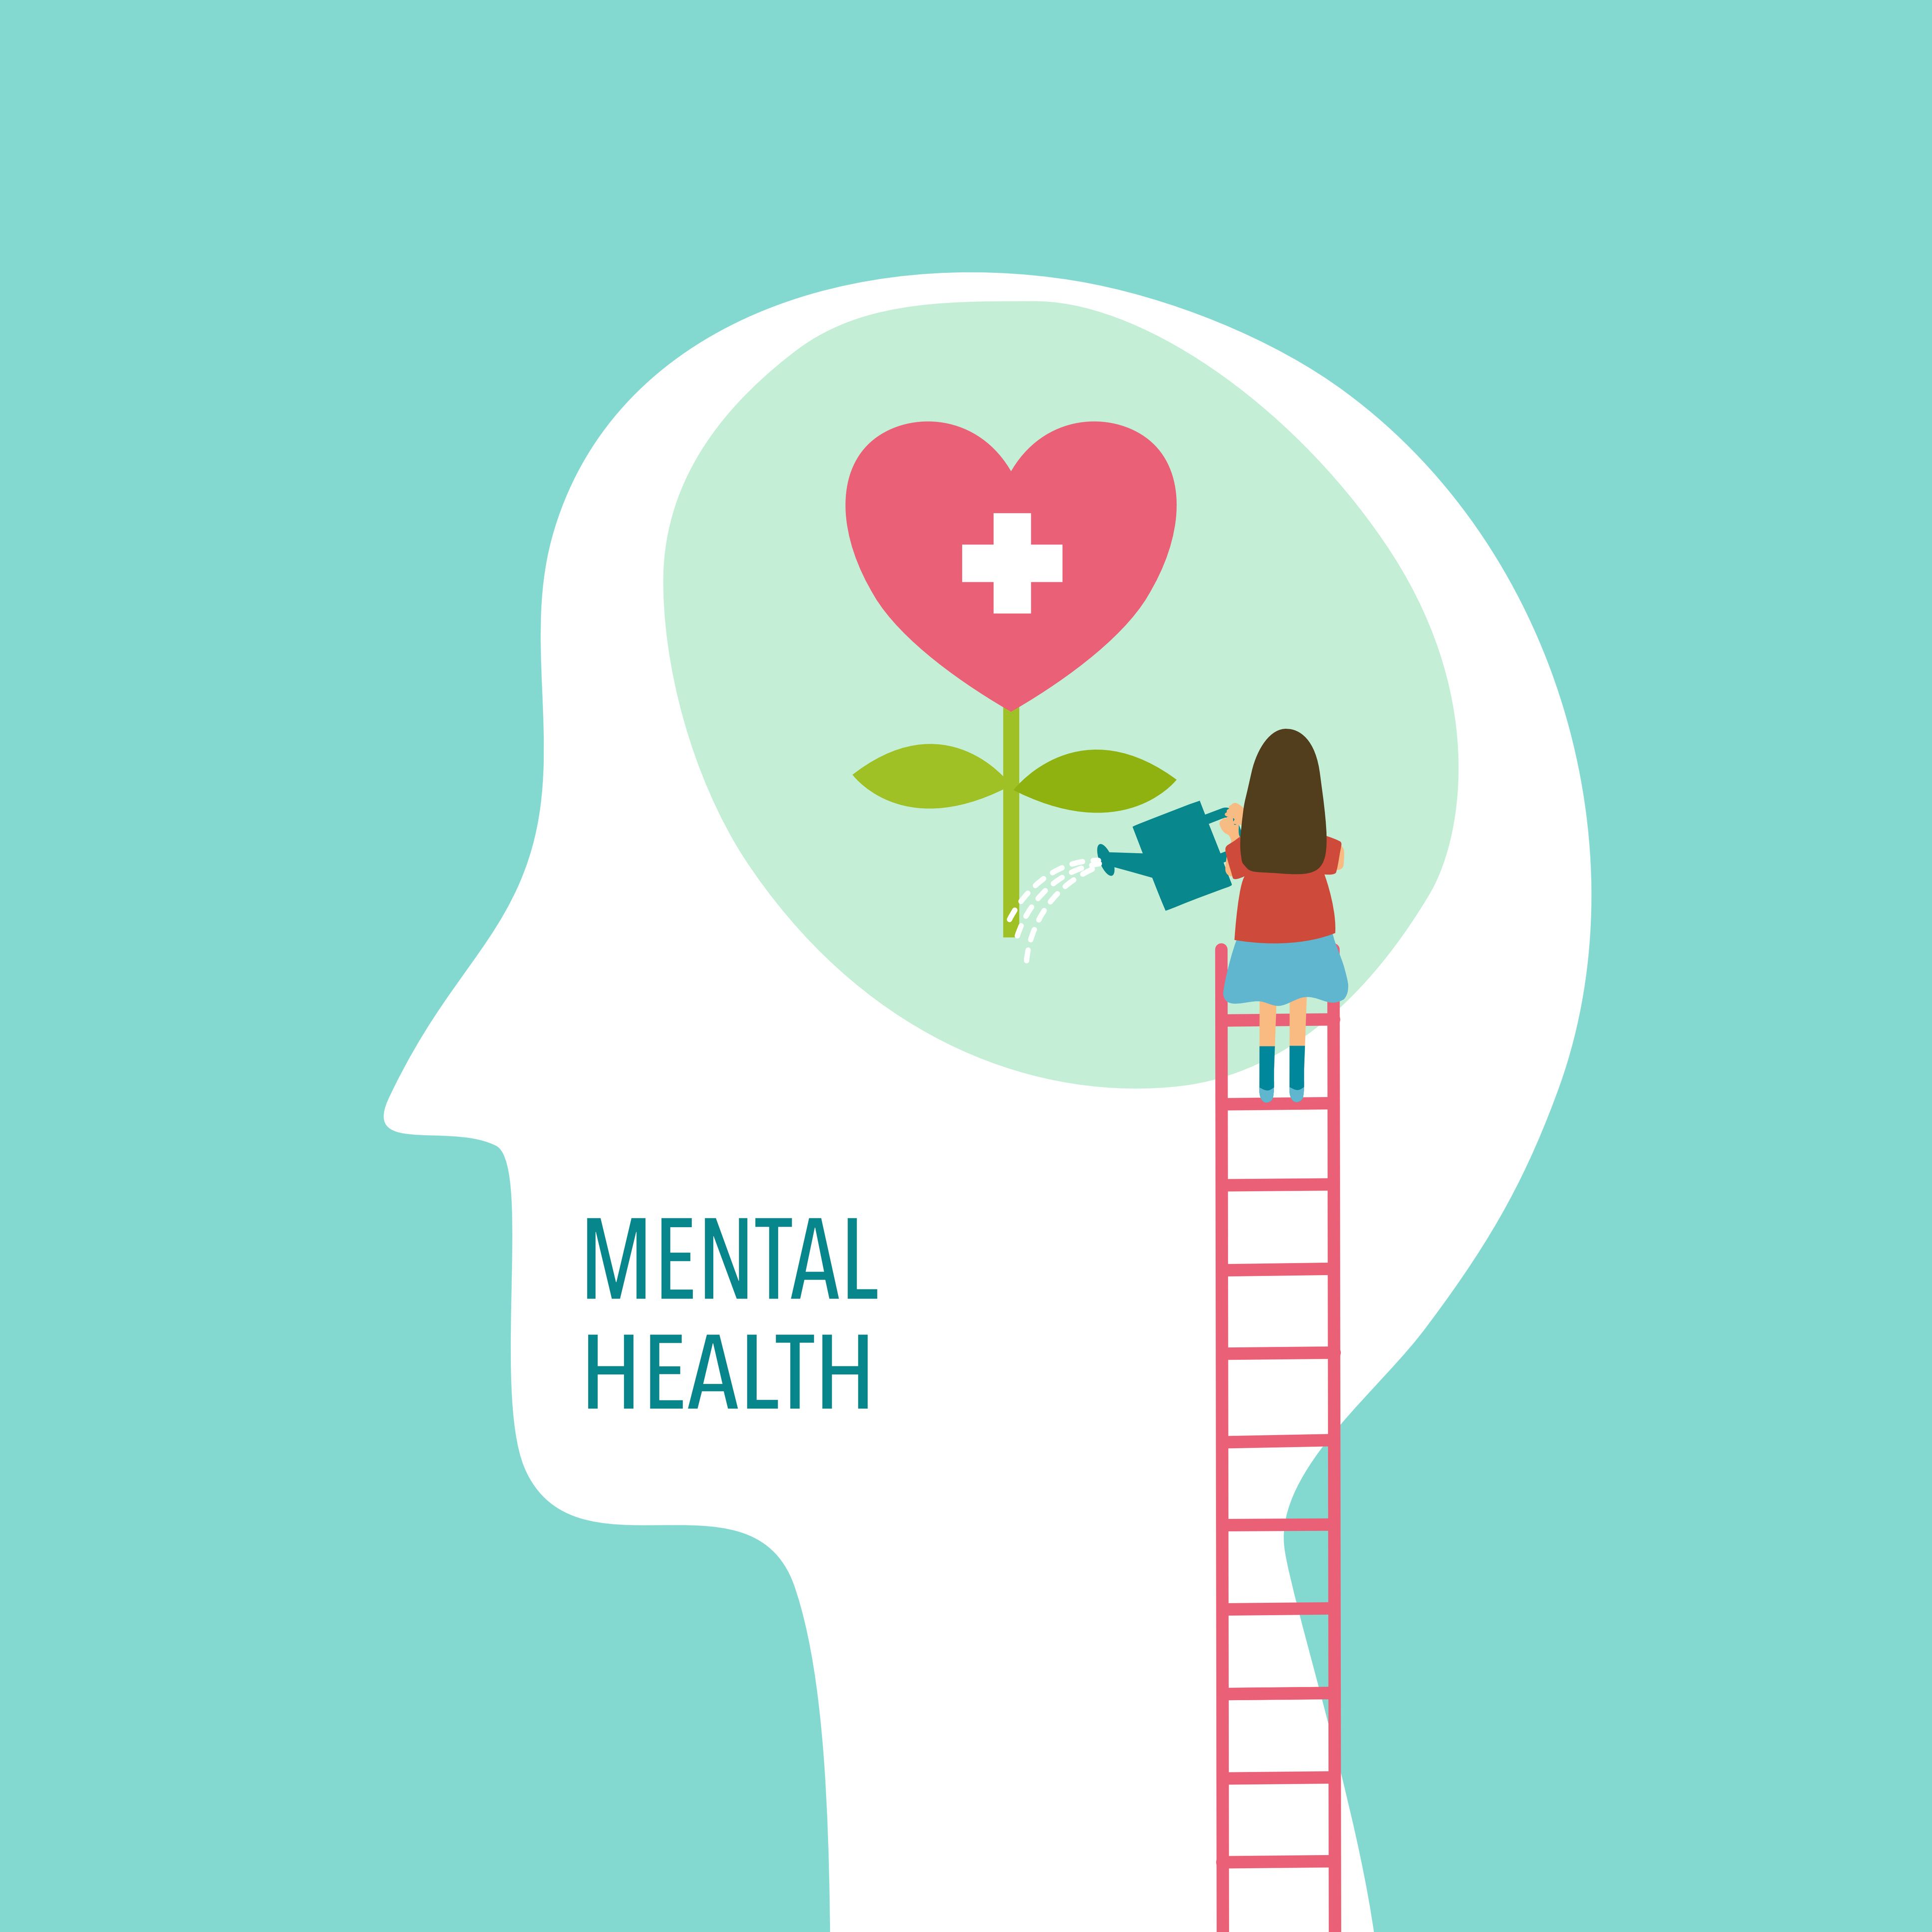 Report Employers To Make Mental Health And Wellbeing A Top Priority